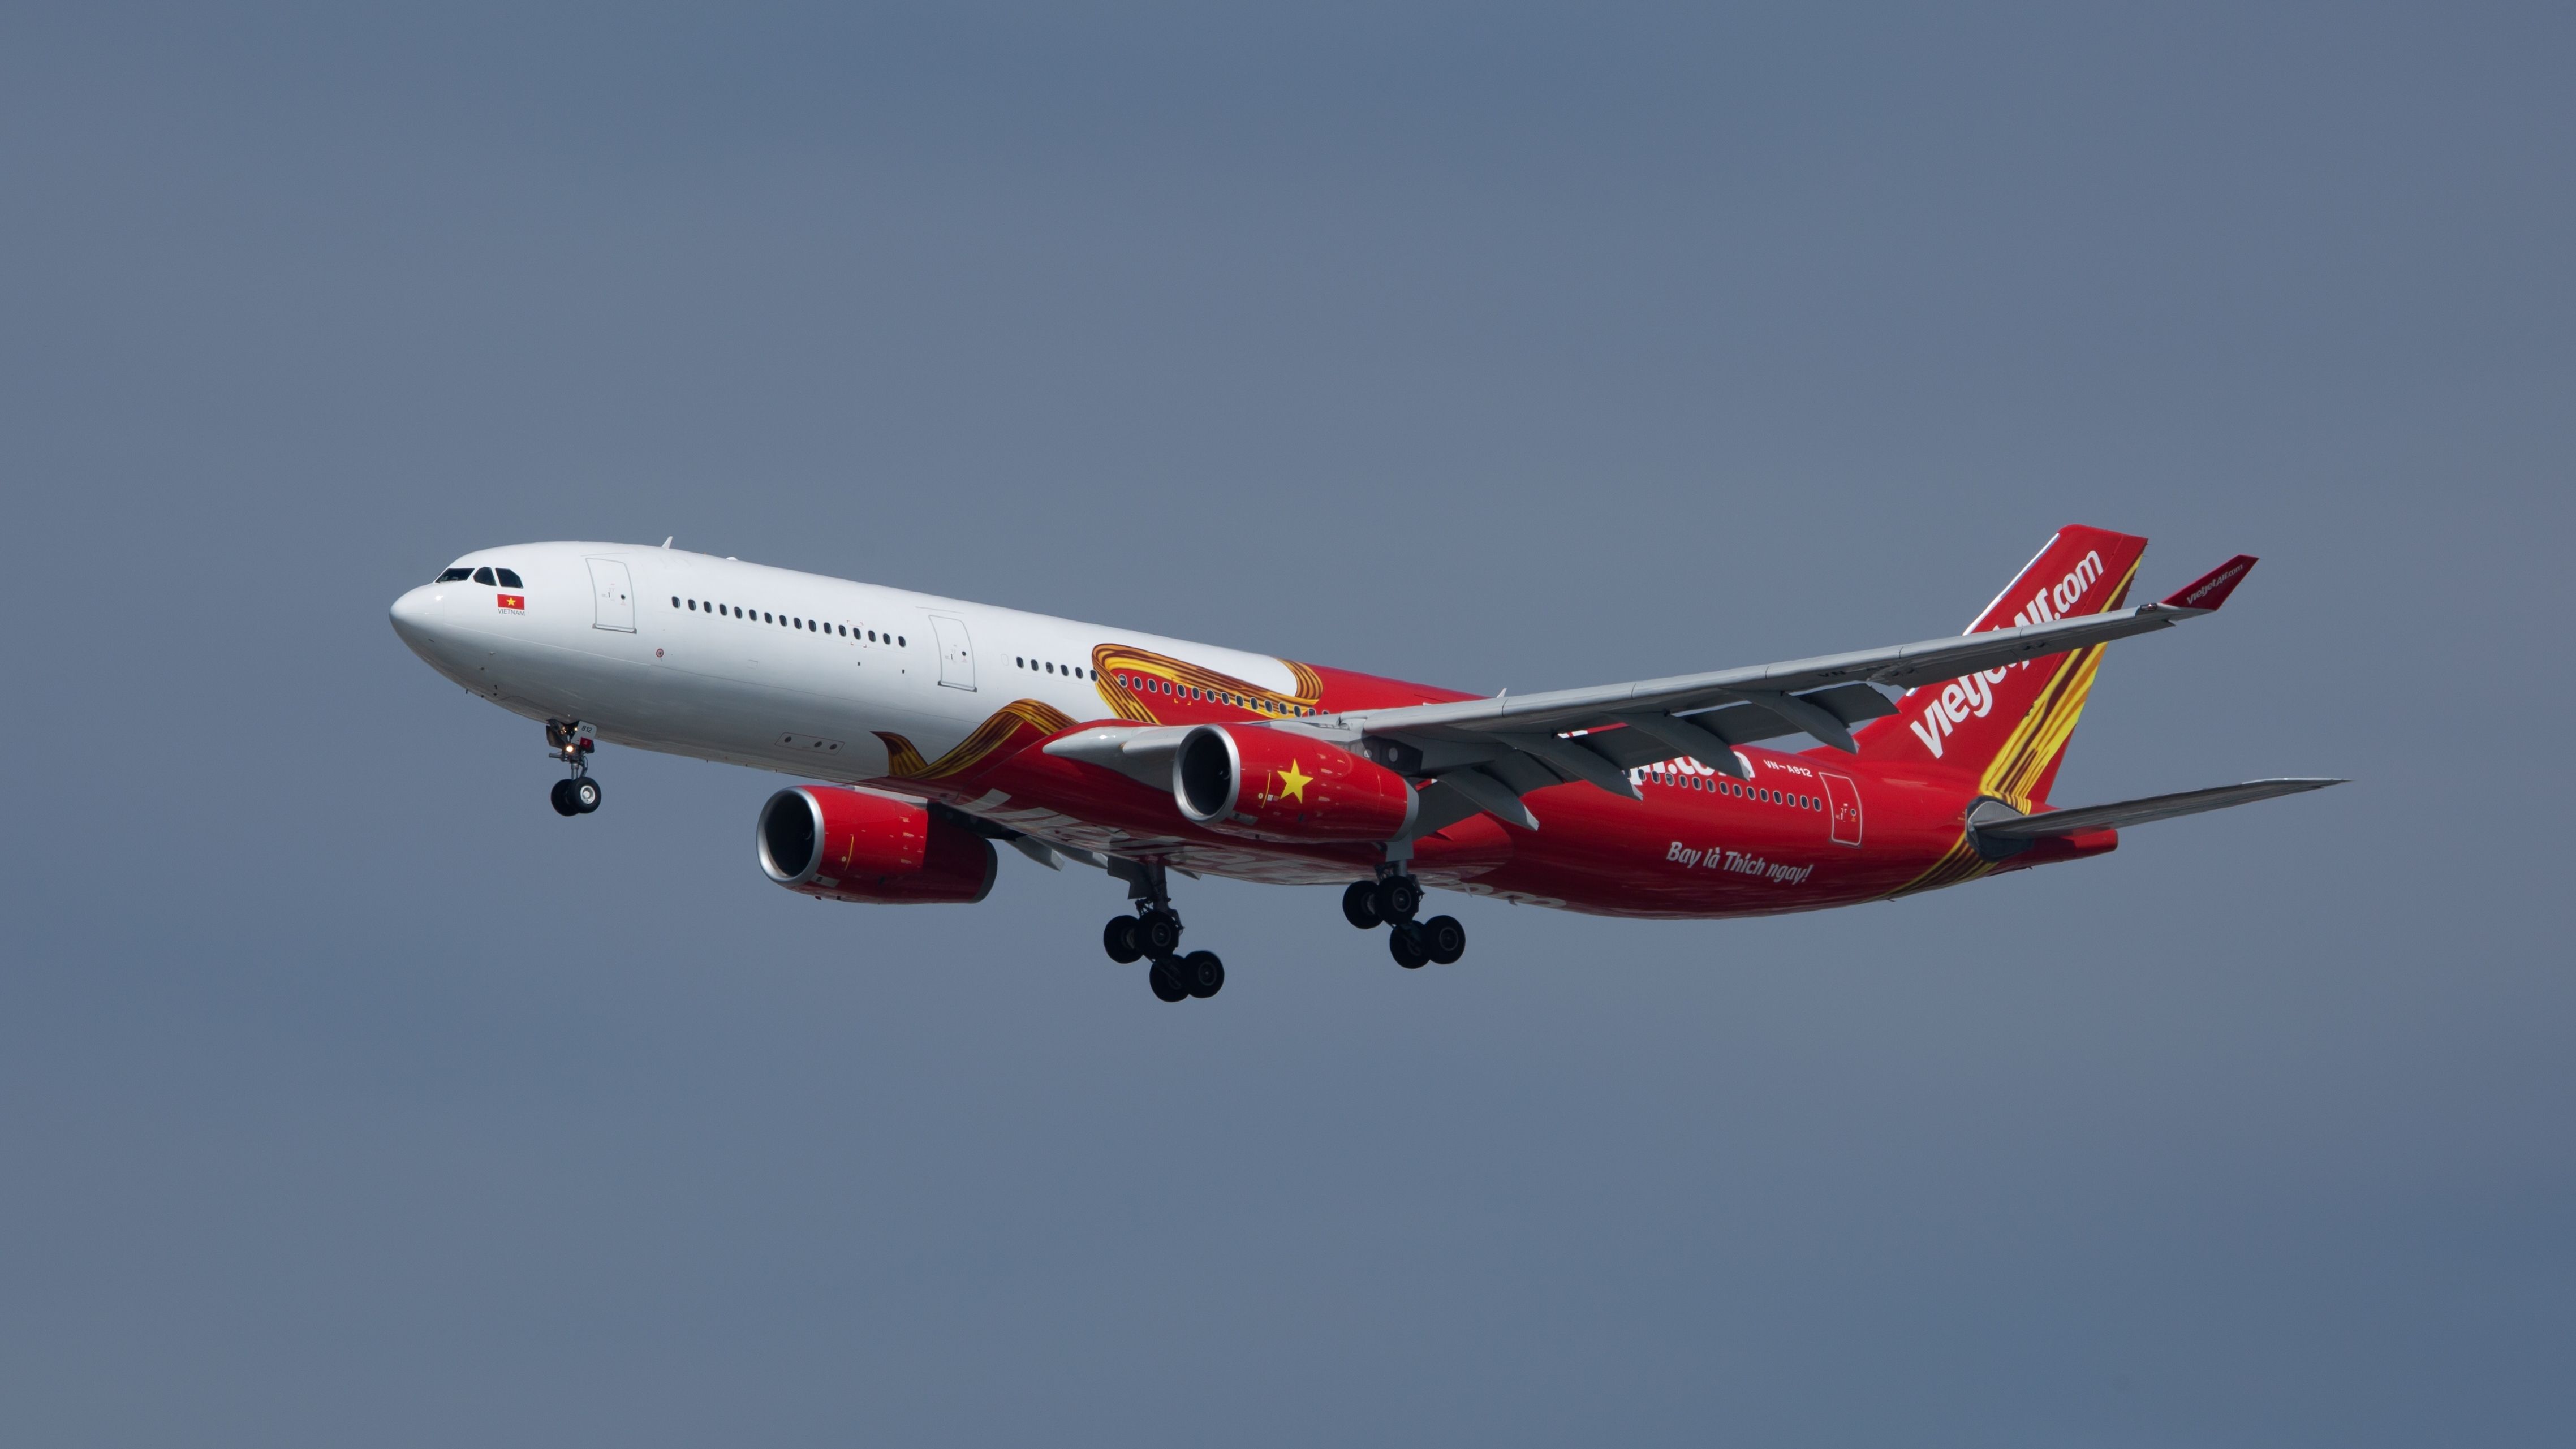 Airbus A330-343 with registration VNA812 of VietJet Air approaching to landing at Tan Son Nhat airport